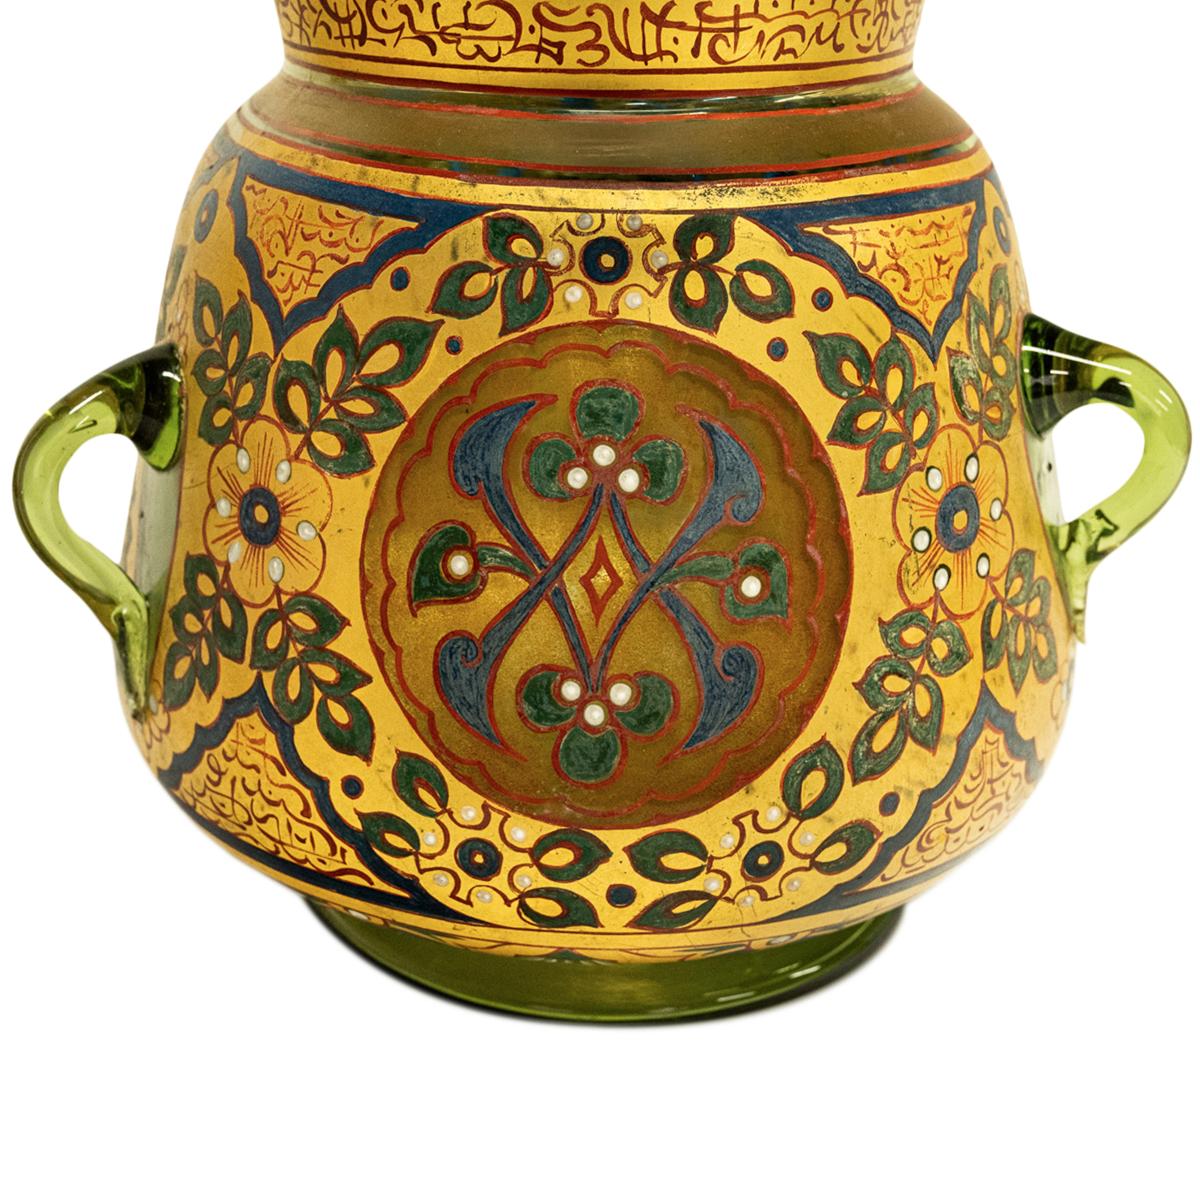 Antique French Islamic Glass Enamel Gilt Mamluk Revival Mosque Lamp Brocard 1880 In Good Condition For Sale In Portland, OR